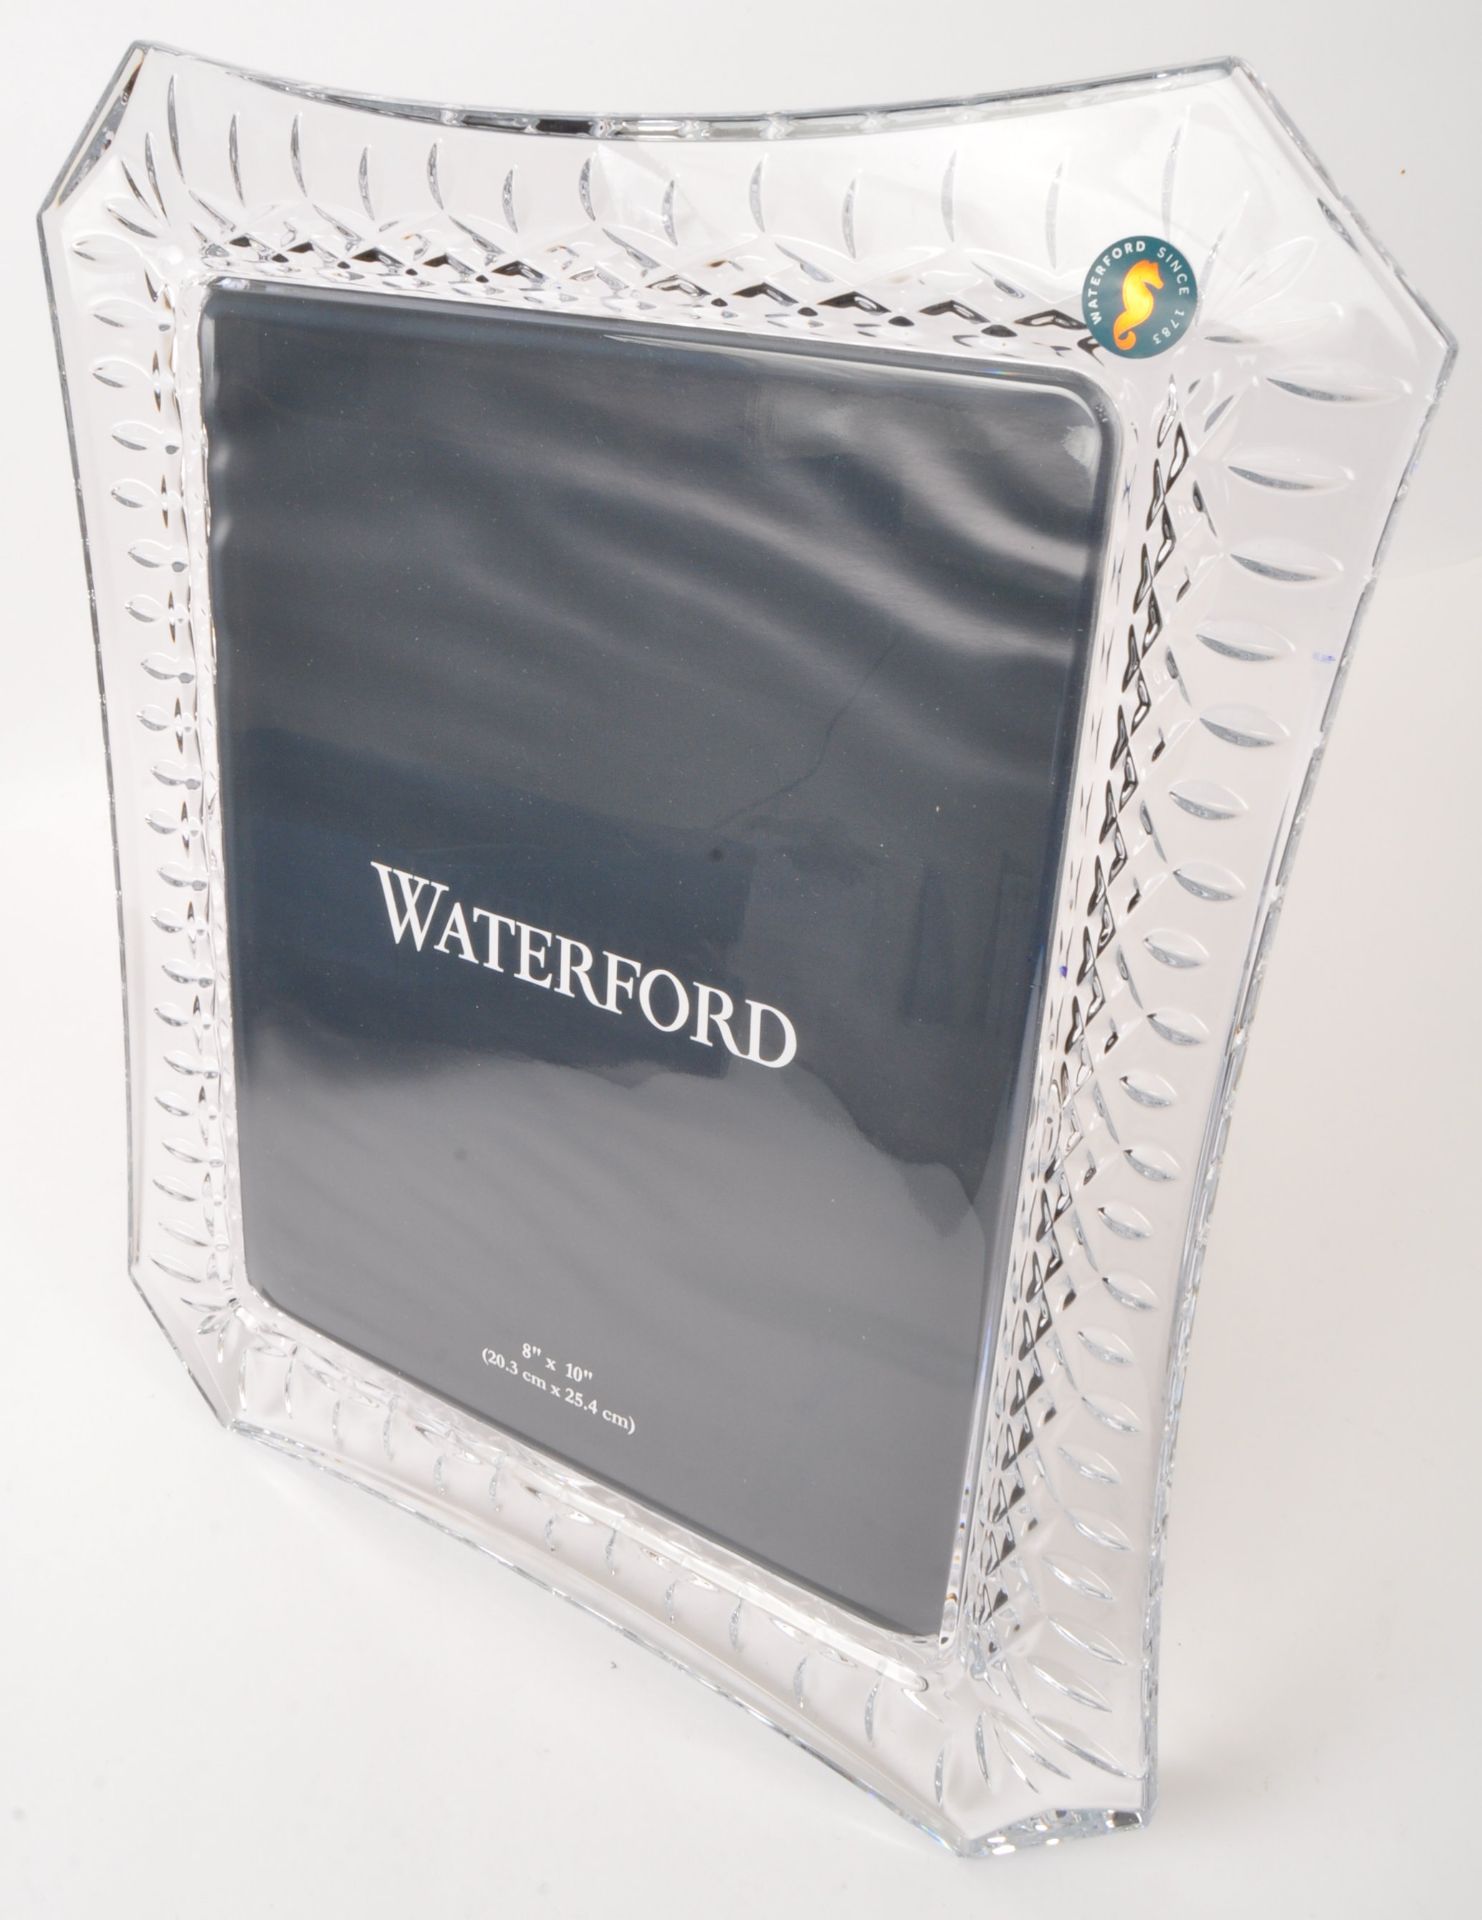 NOS WATERFORD CRYSTAL LISMORE PHOTO FRAME - Image 6 of 6